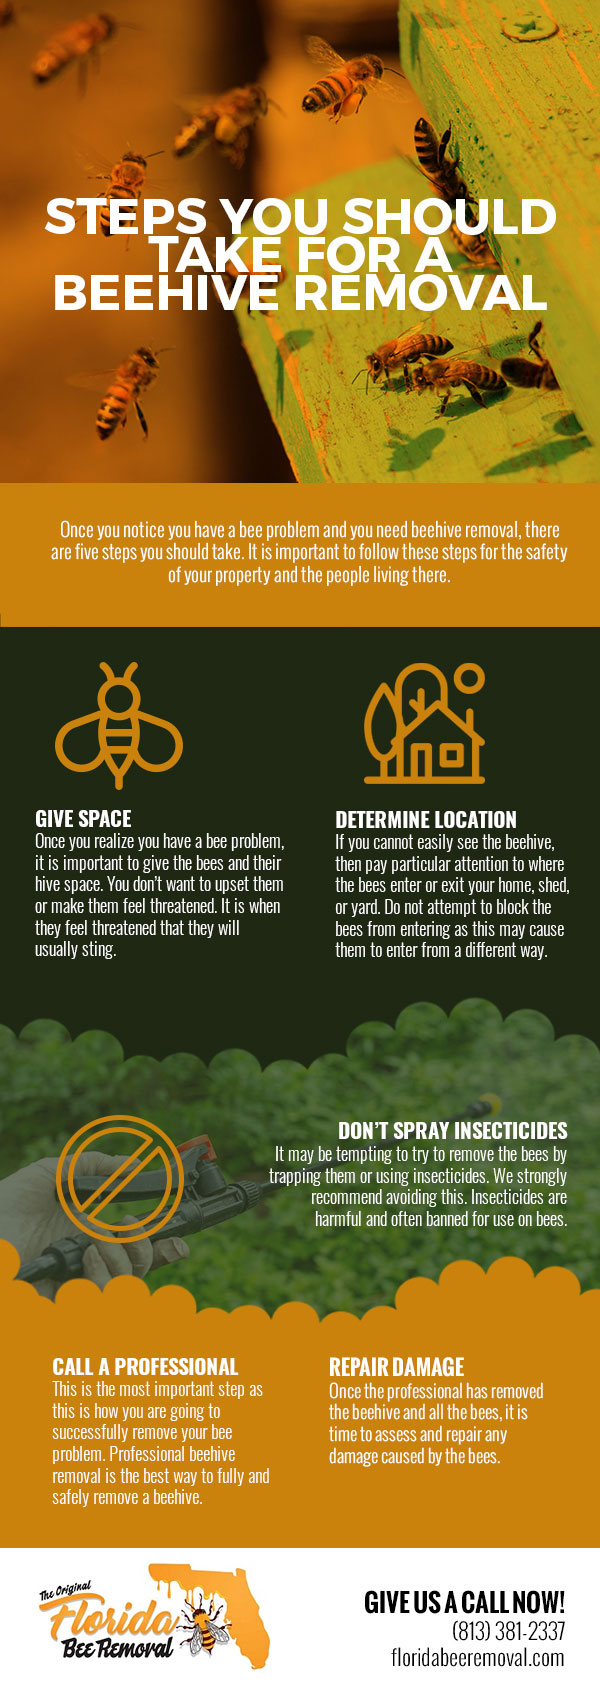 Steps You Should Take for a Beehive Removal